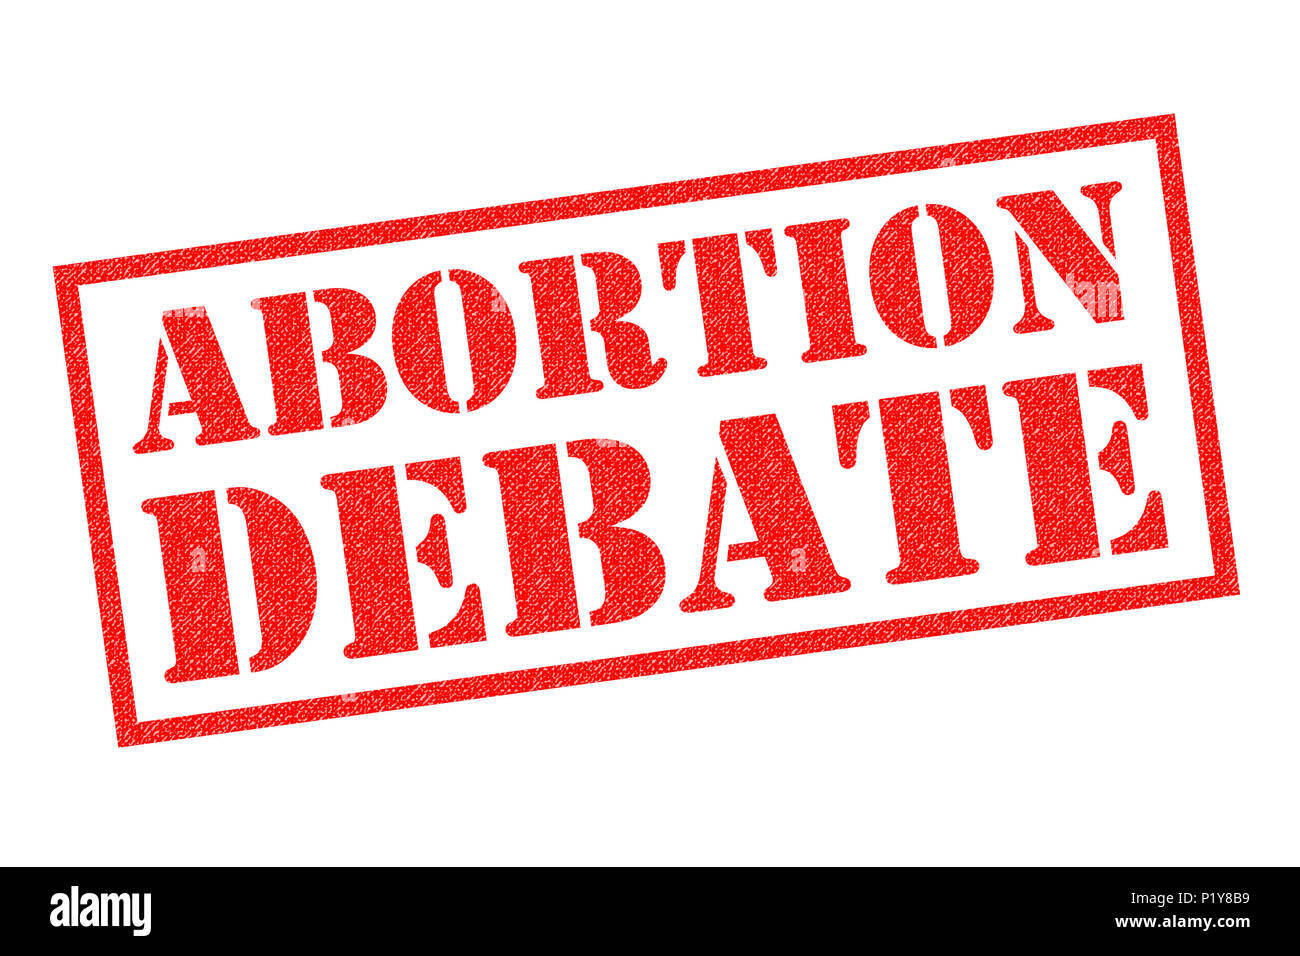 ABORTION DEBATE red rubber stamp over a white background. Stock Photo